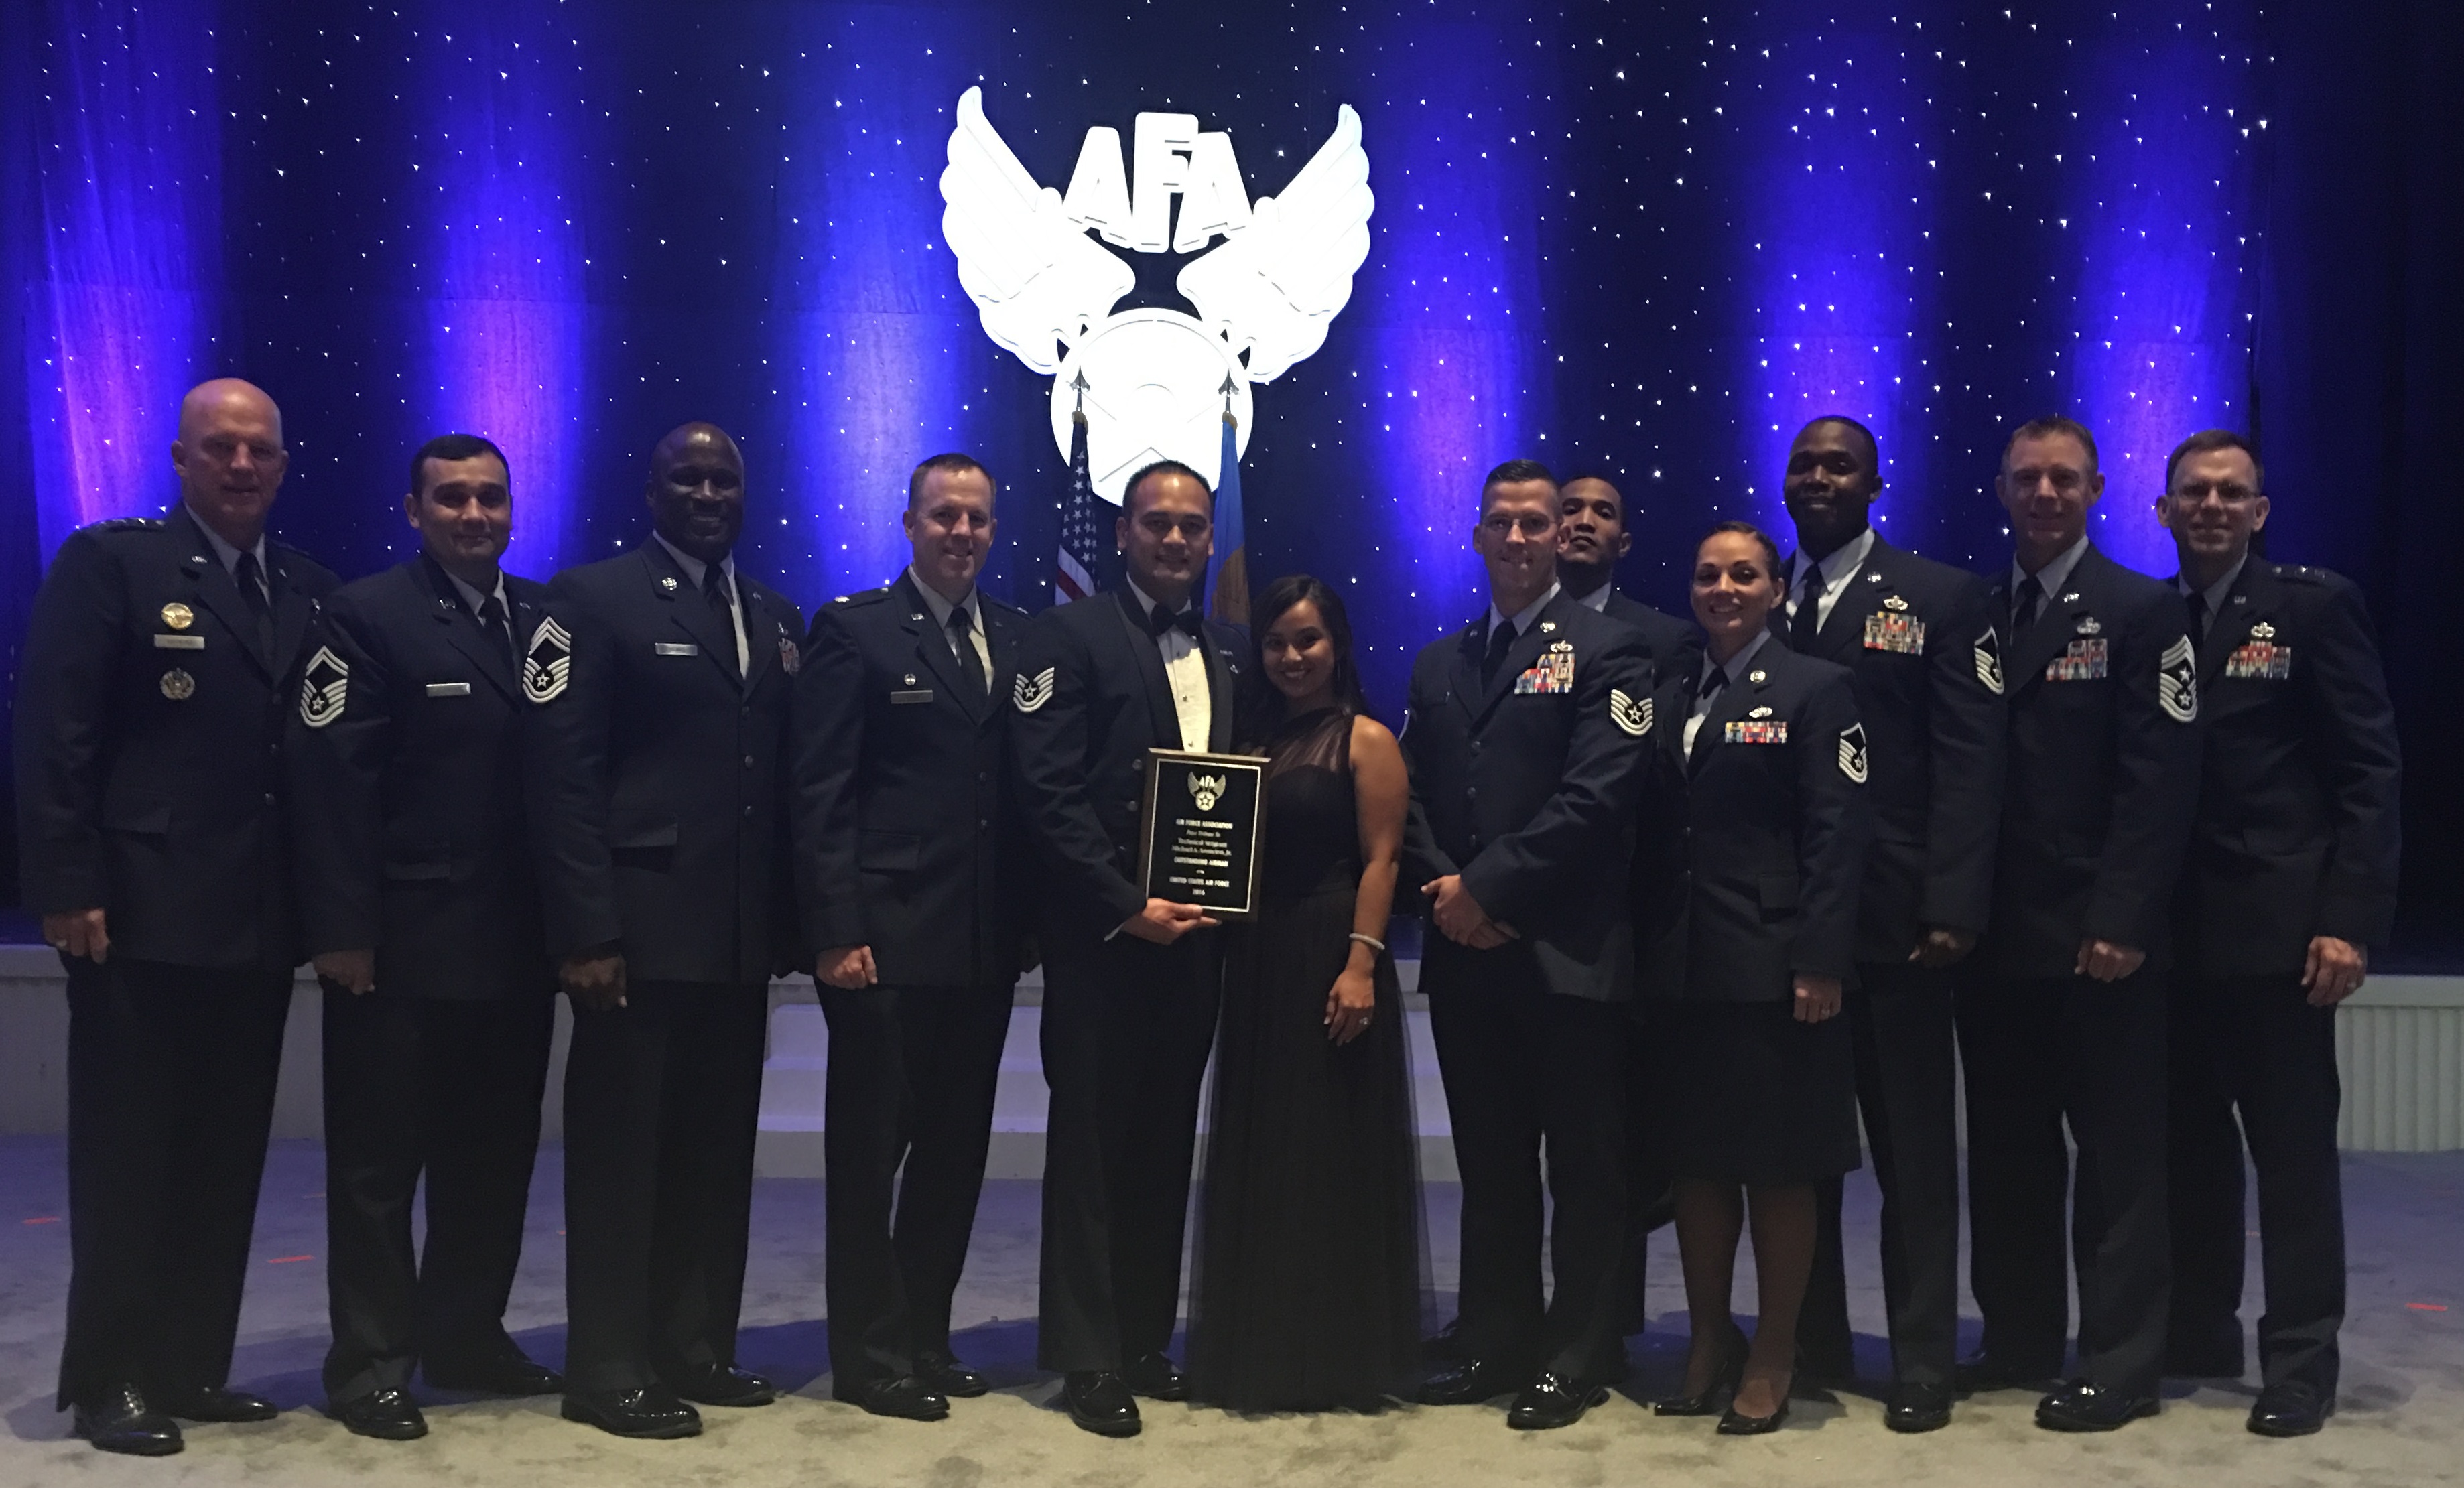 45th CES technical sergeant among 12 Outstanding Airmen of the Year